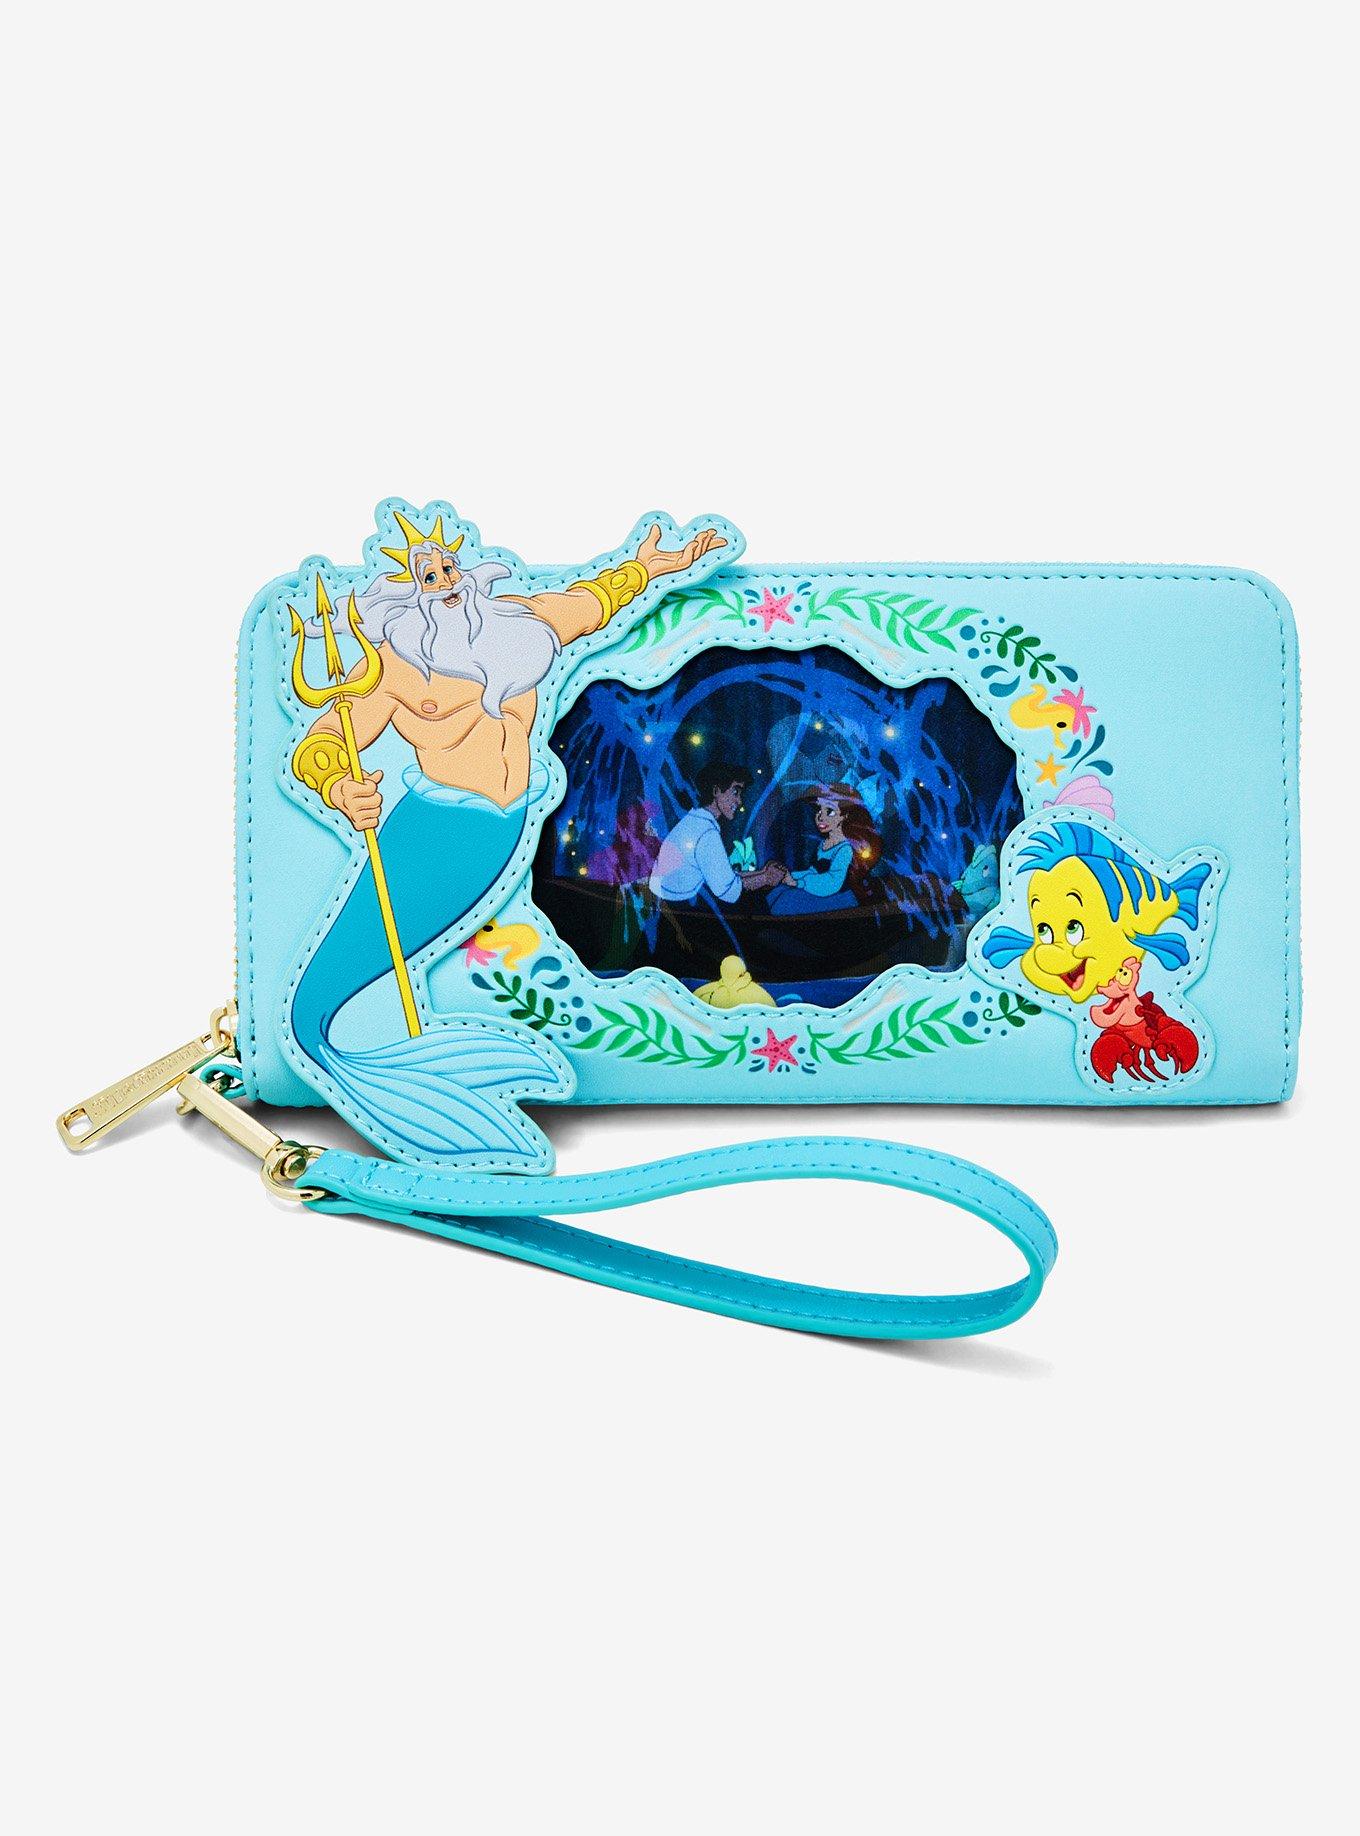  Loungefly Disney Villains Scenes Maleficent Sleeping Beauty Zip  Around Wallet : Clothing, Shoes & Jewelry